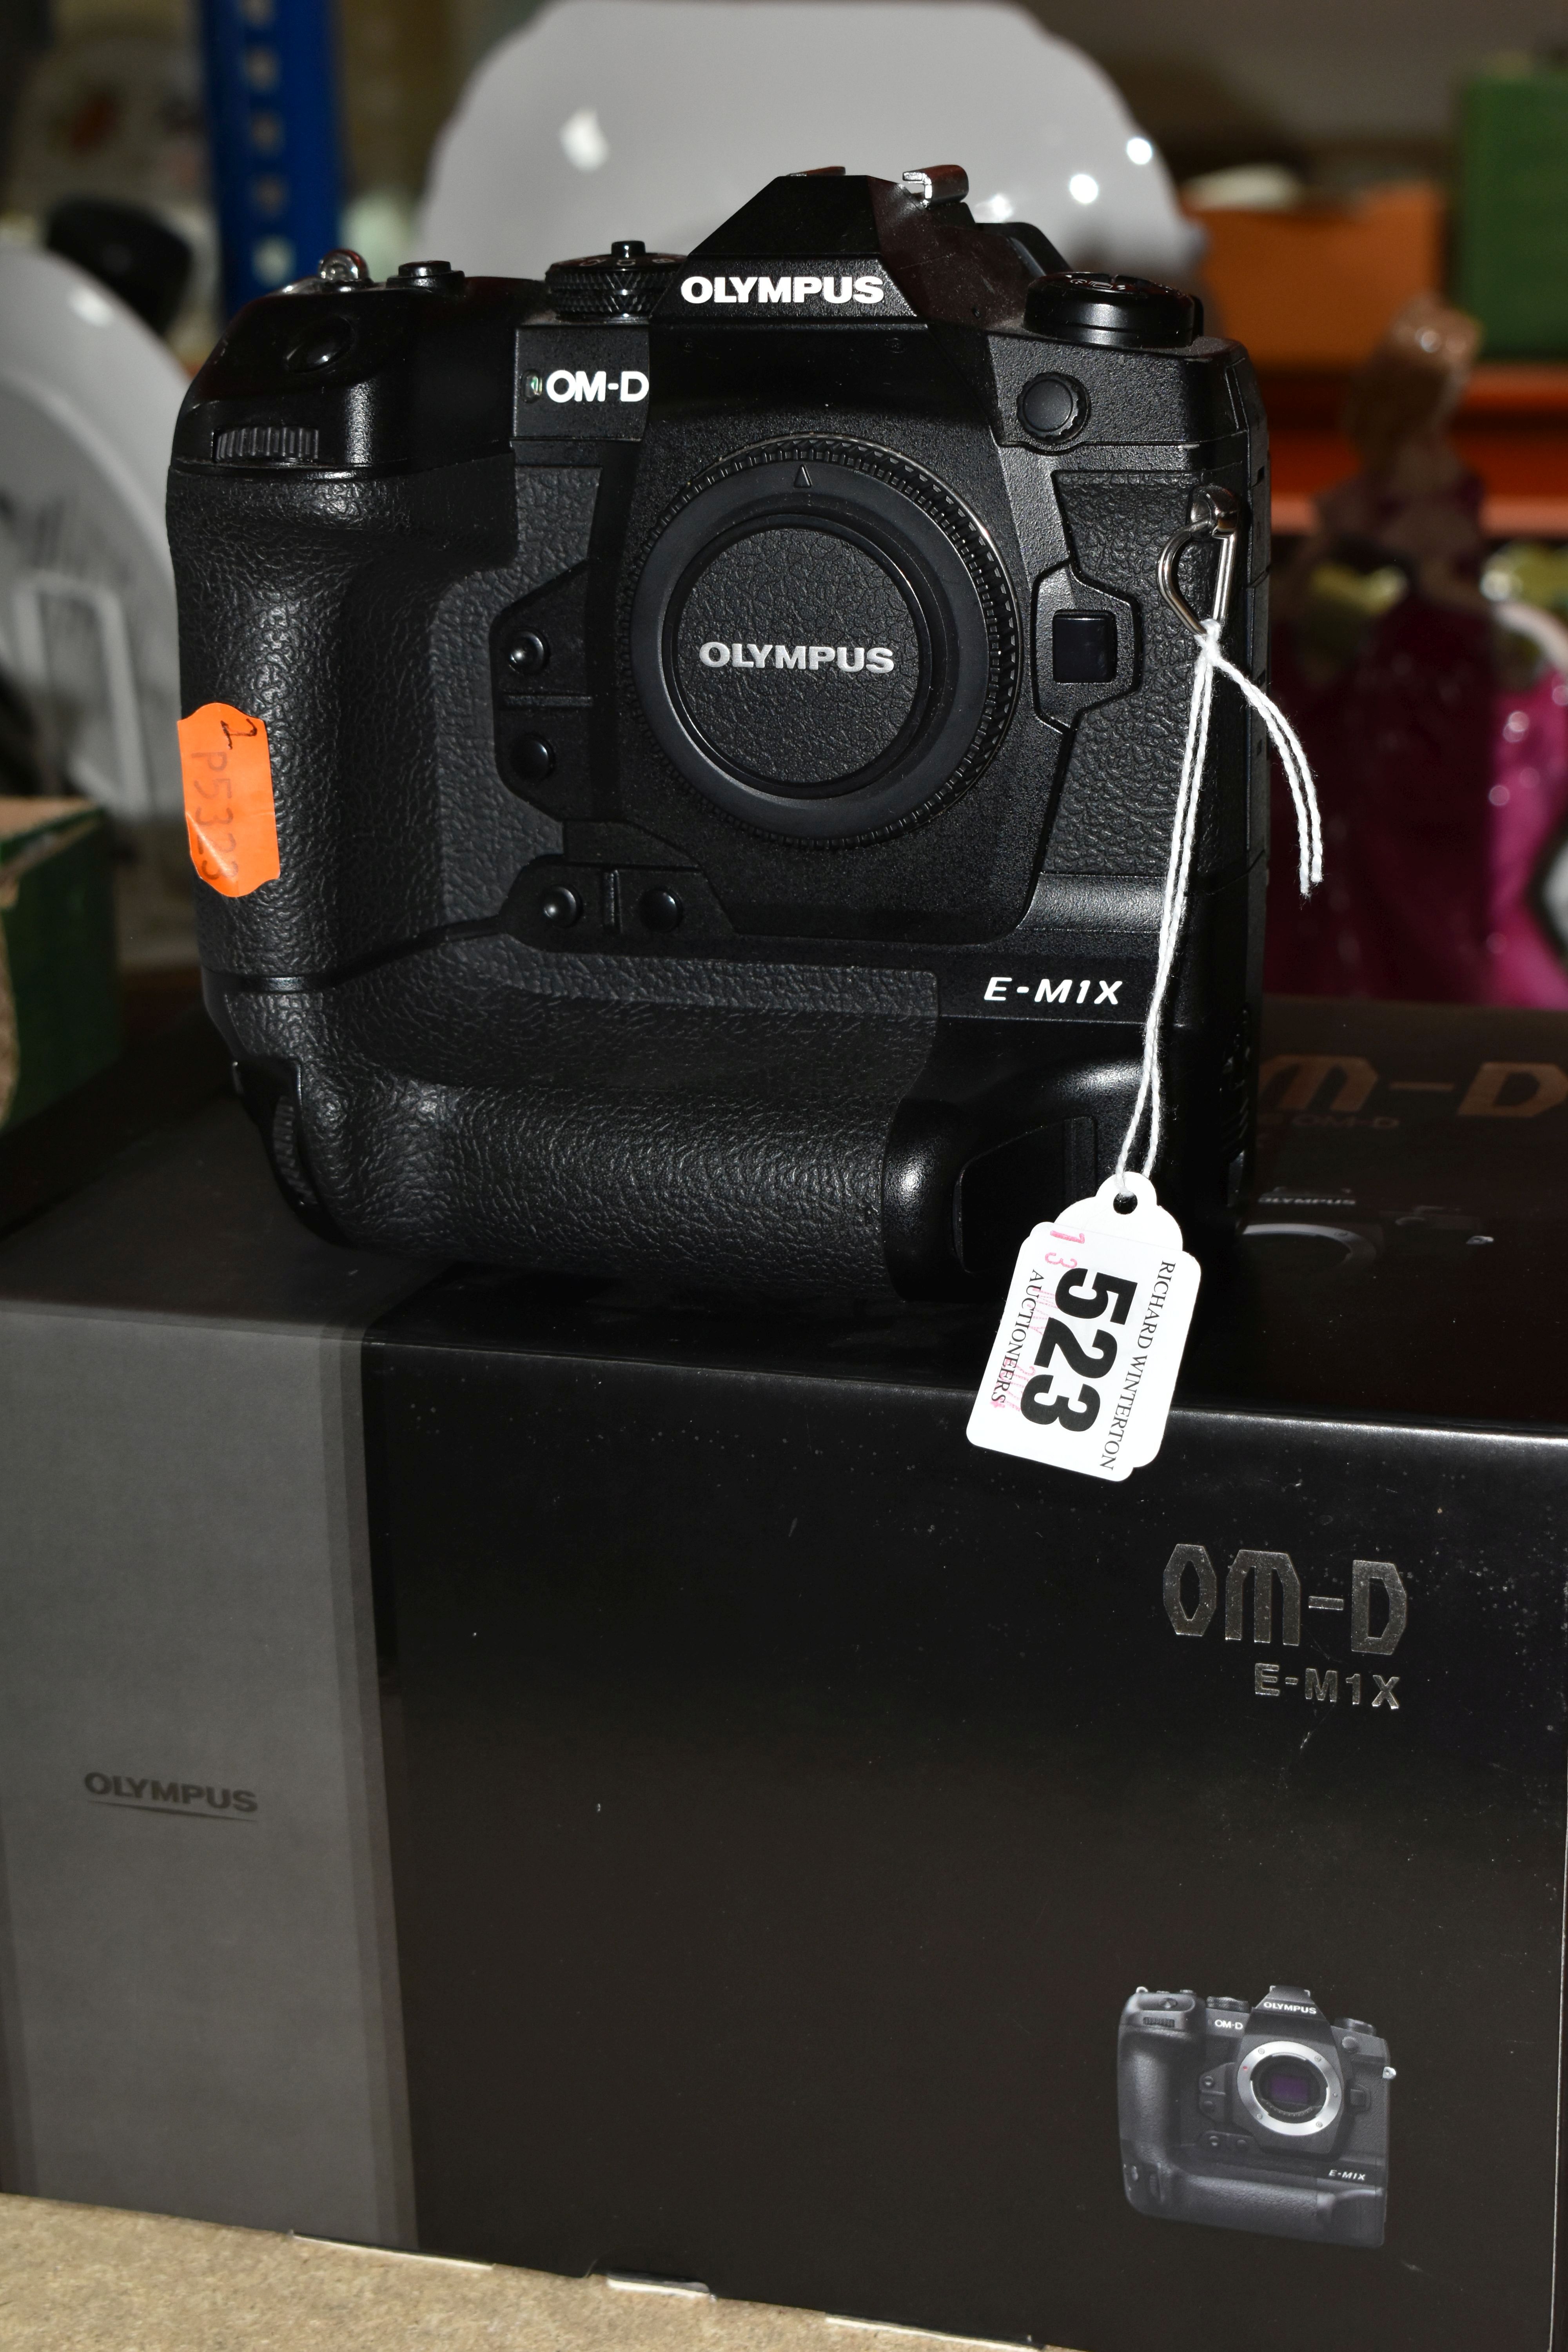 AN OLYMPUS OM-D E-M1X MIRRORLESS 4/3 CAMERA BODY, complete with battery charger (no UK power cable),